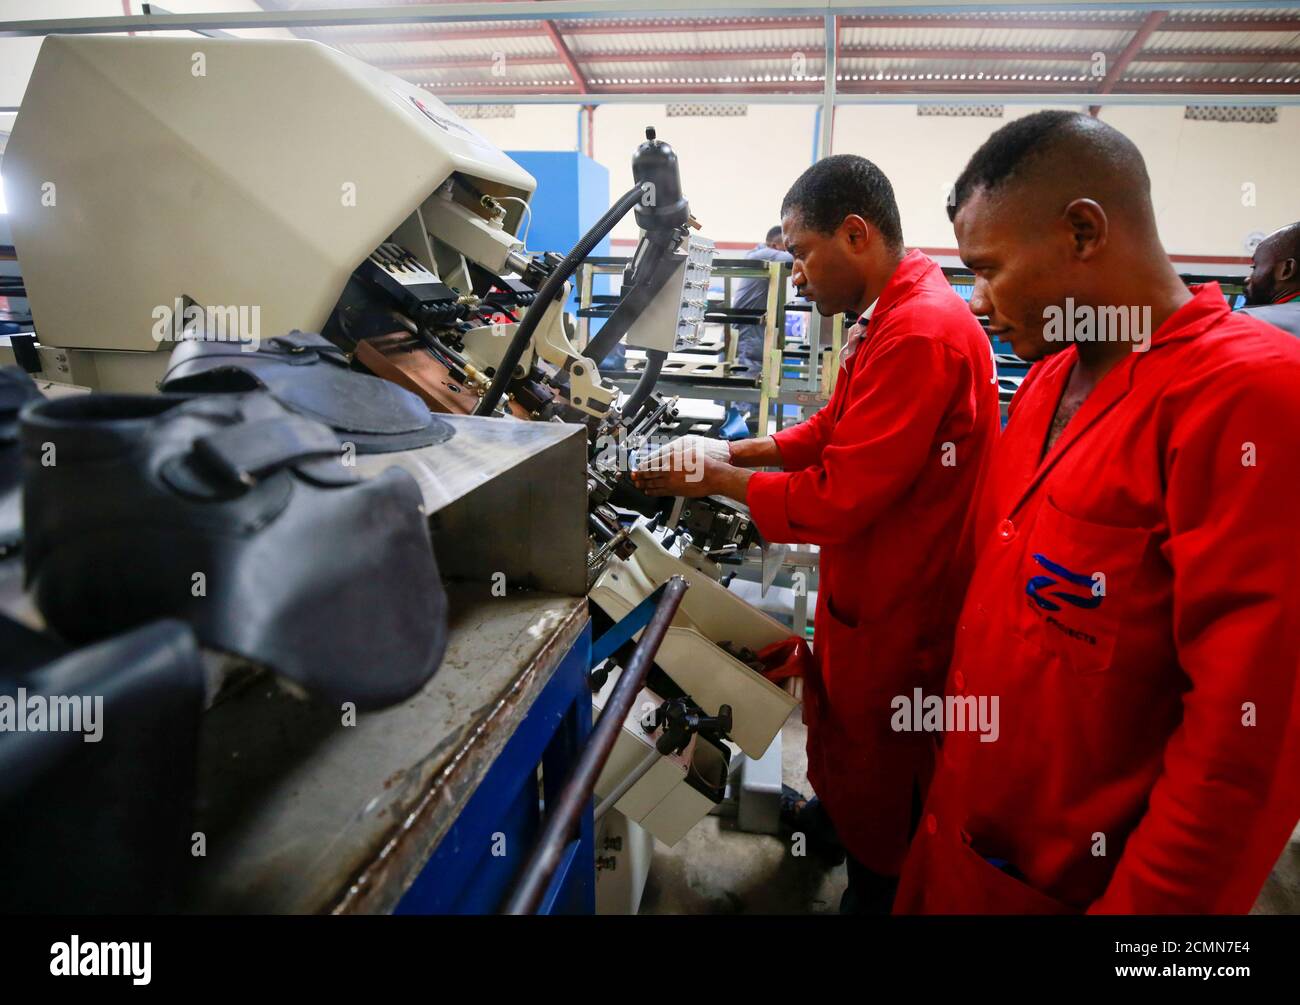 Workers operate a machine at a Bata shoe factory in Abuja, Nigeria January 13, 2020. Picture taken January 13, 2020. REUTERS/Afolabi Sotunde Stock Photo